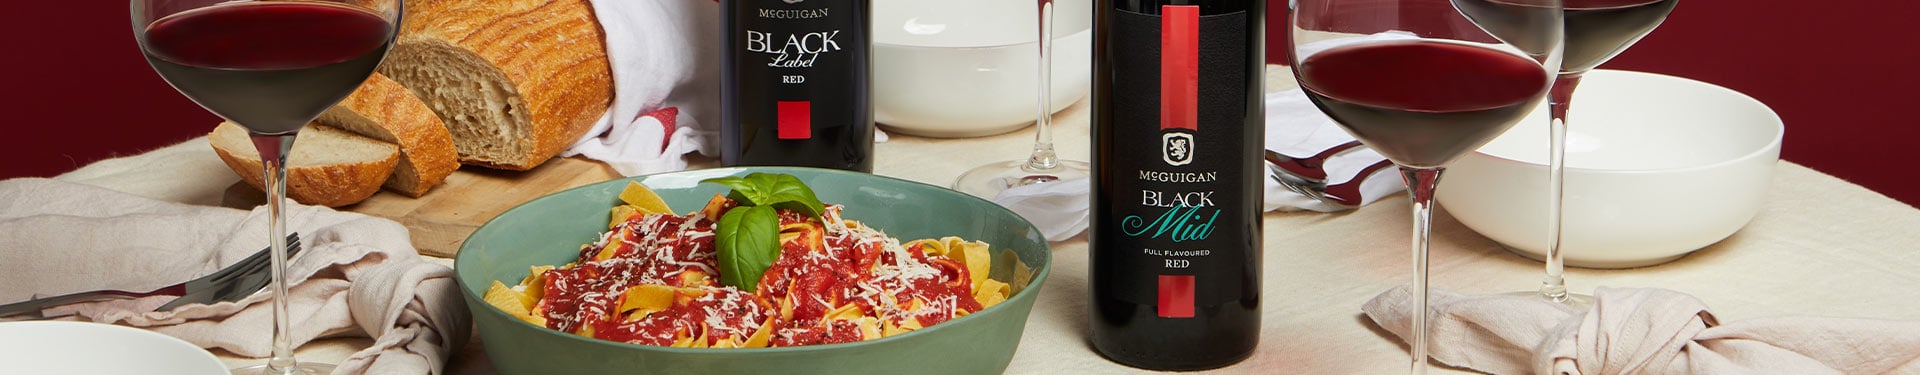 A bottle of McGuigan Black Label Red and Black Label Red Mid in a dinner table setting.